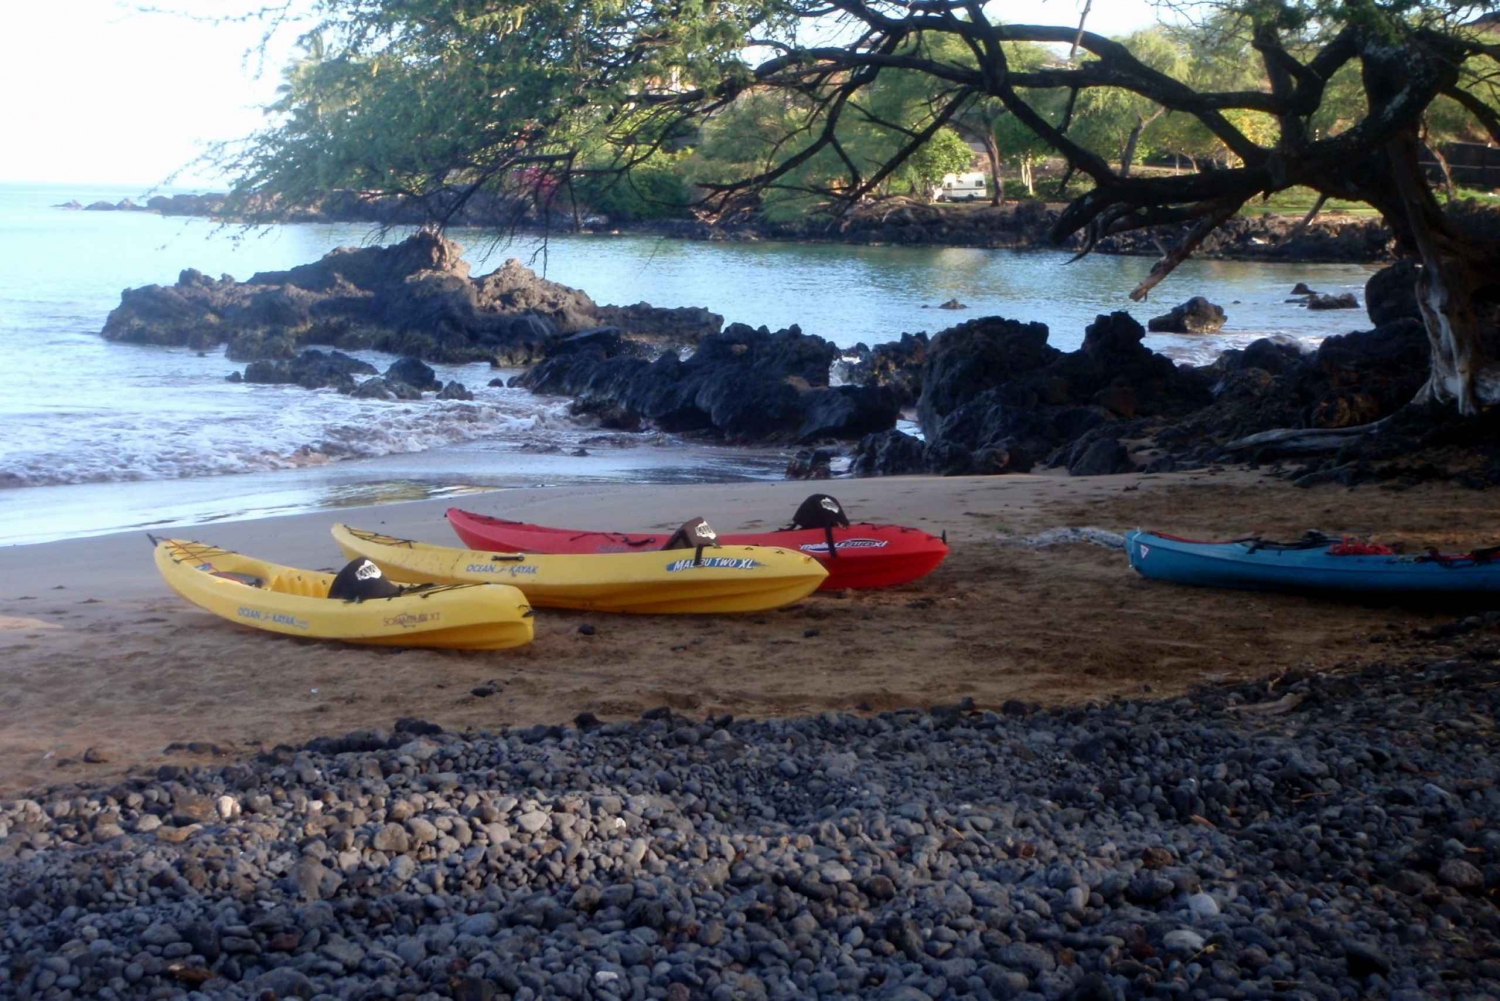 Maui: Whale Watch Kayaking and Snorkel Tour in Kihei